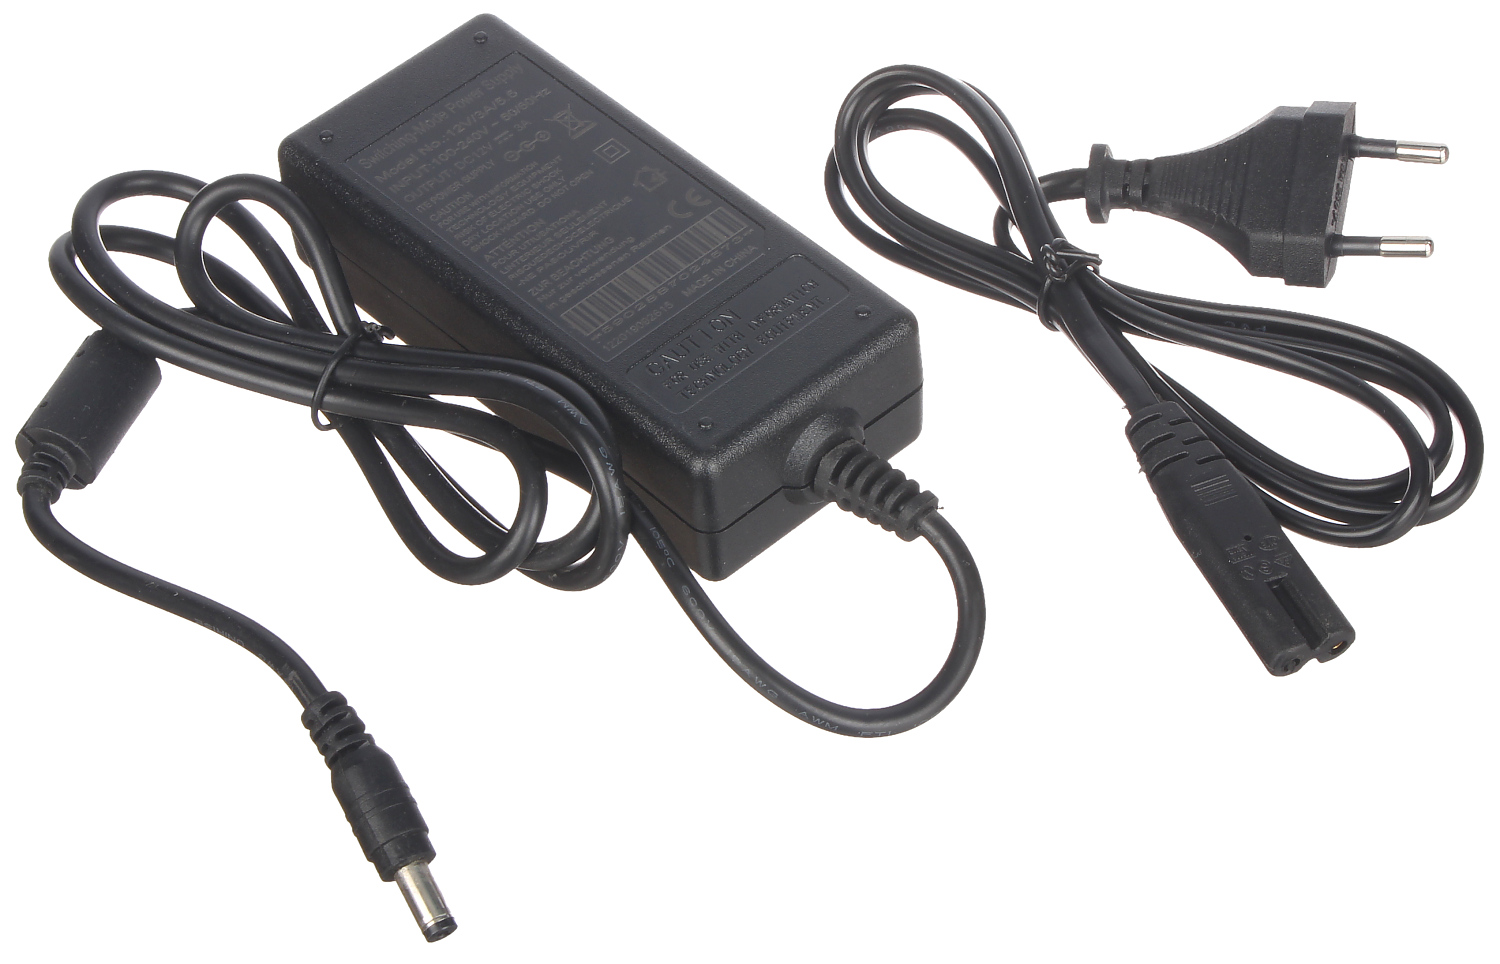 POWER SUPPLY ADAPTER 12V/3A/5.5 - With plug, indoor - Delta